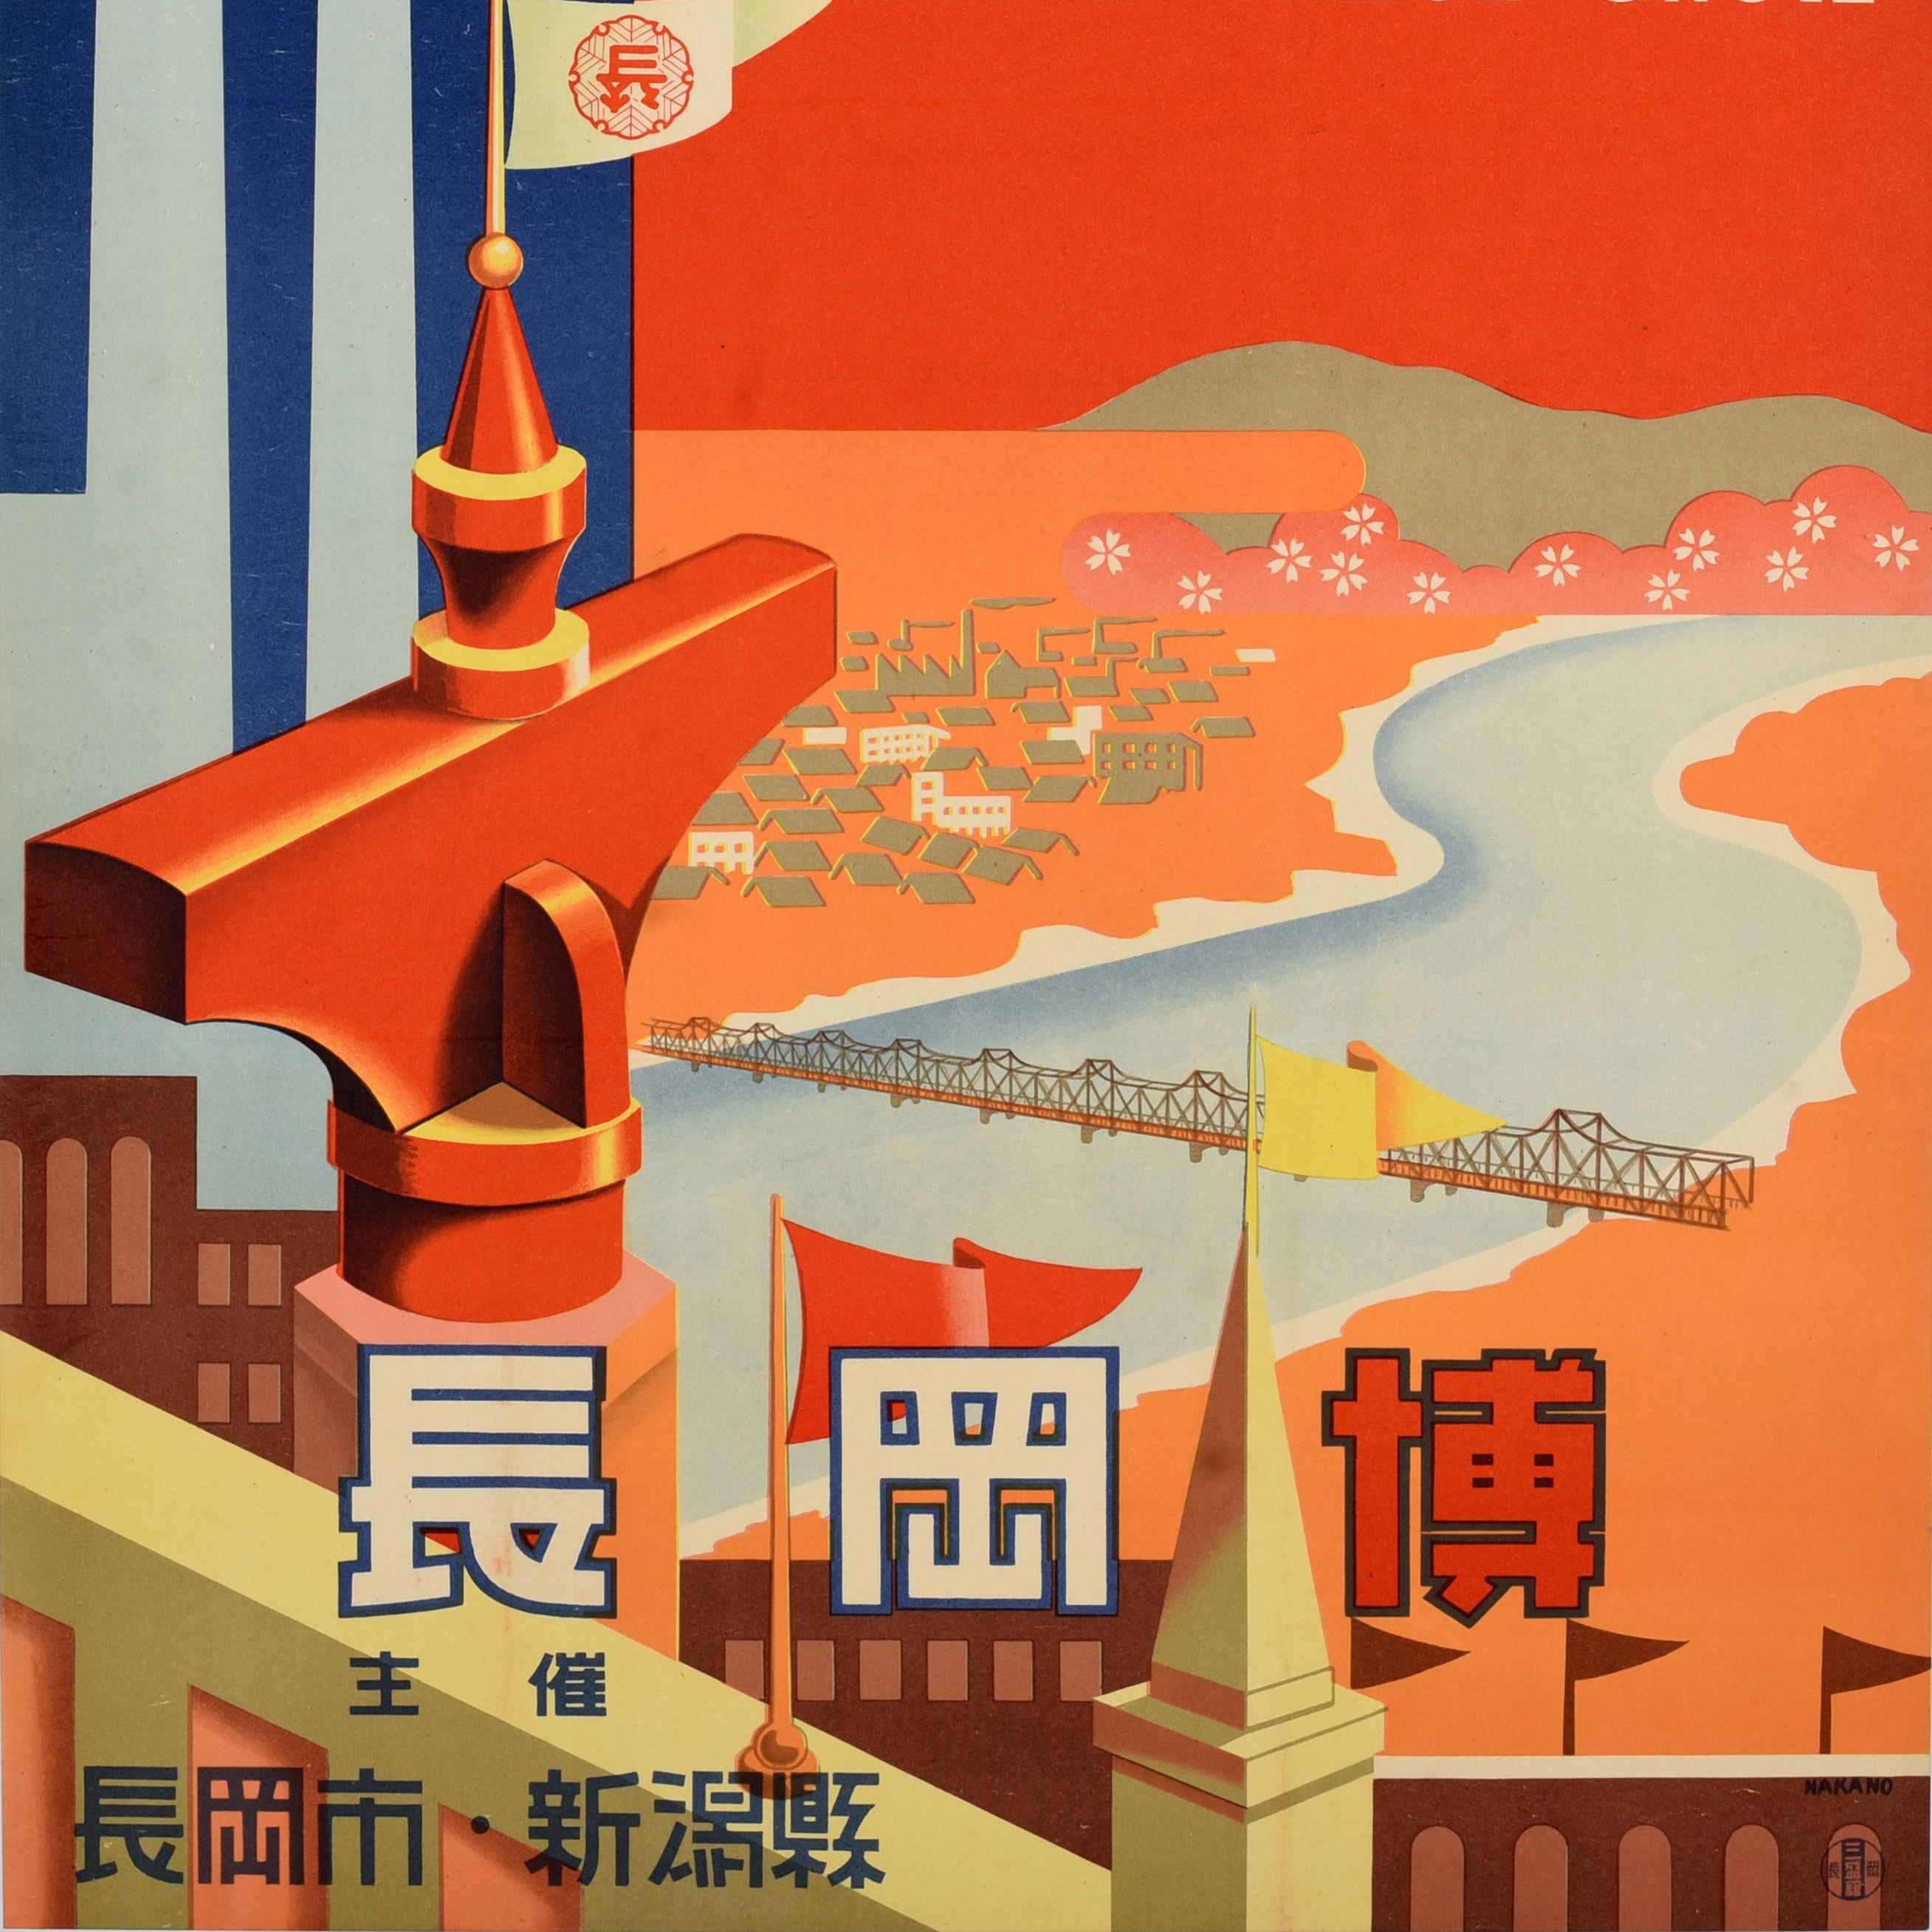 Original vintage travel advertising poster for the 新潟 Niigata Prefecture Industry Expo held from 20 July to 31 August 1950 featuring a colourful design depicting smoke rising from industrial factory chimneys, a bridge over a river and a town in